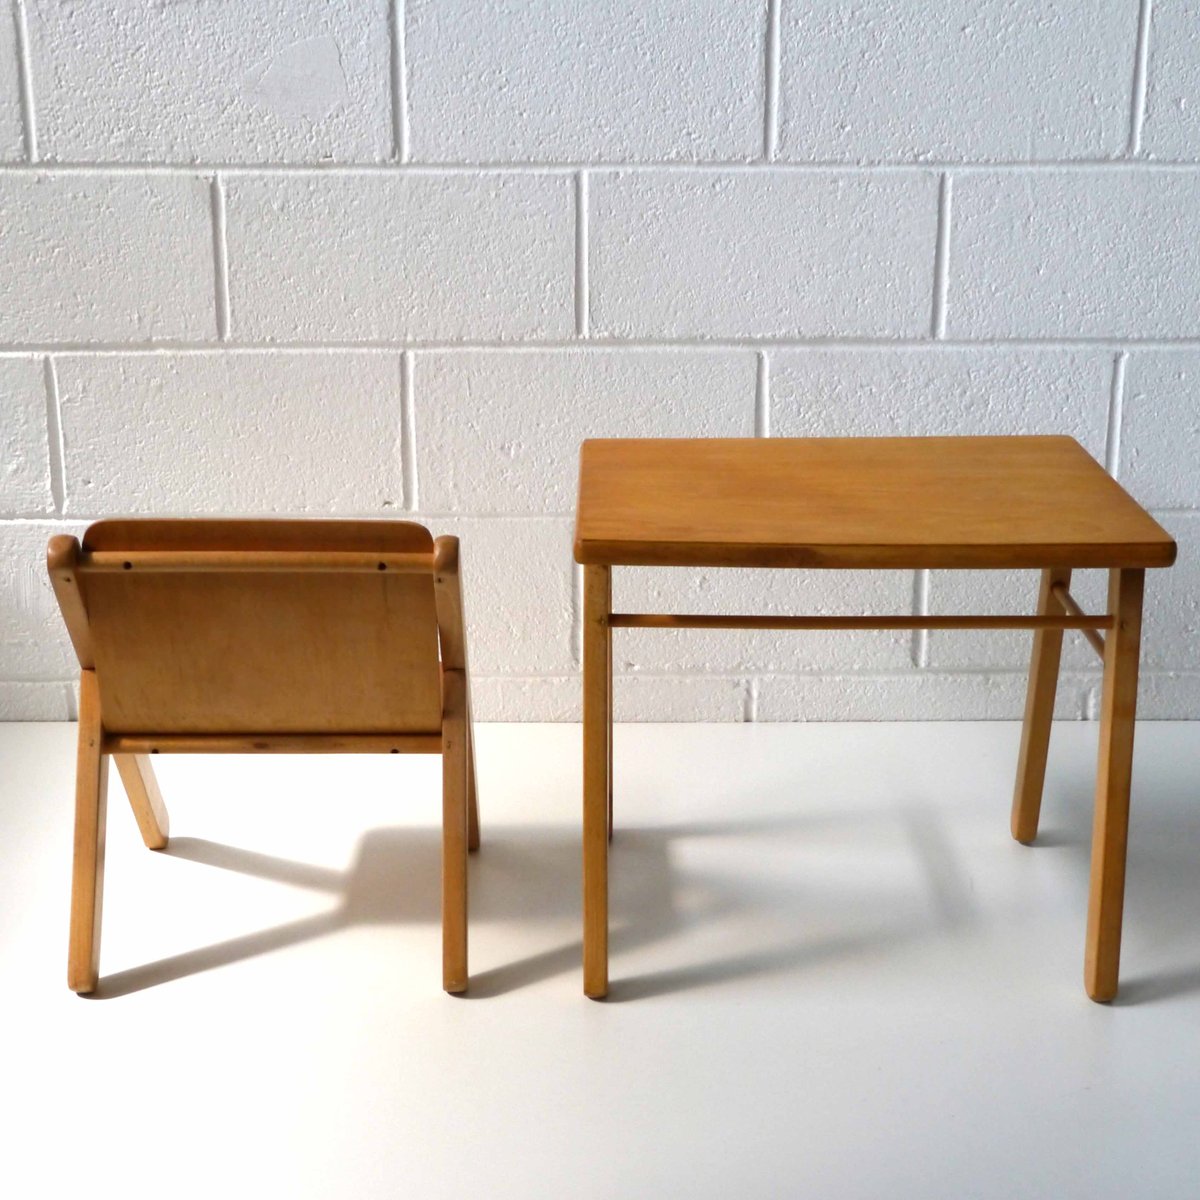 Children's Desk and Chair, 1970s for sale at Pamono